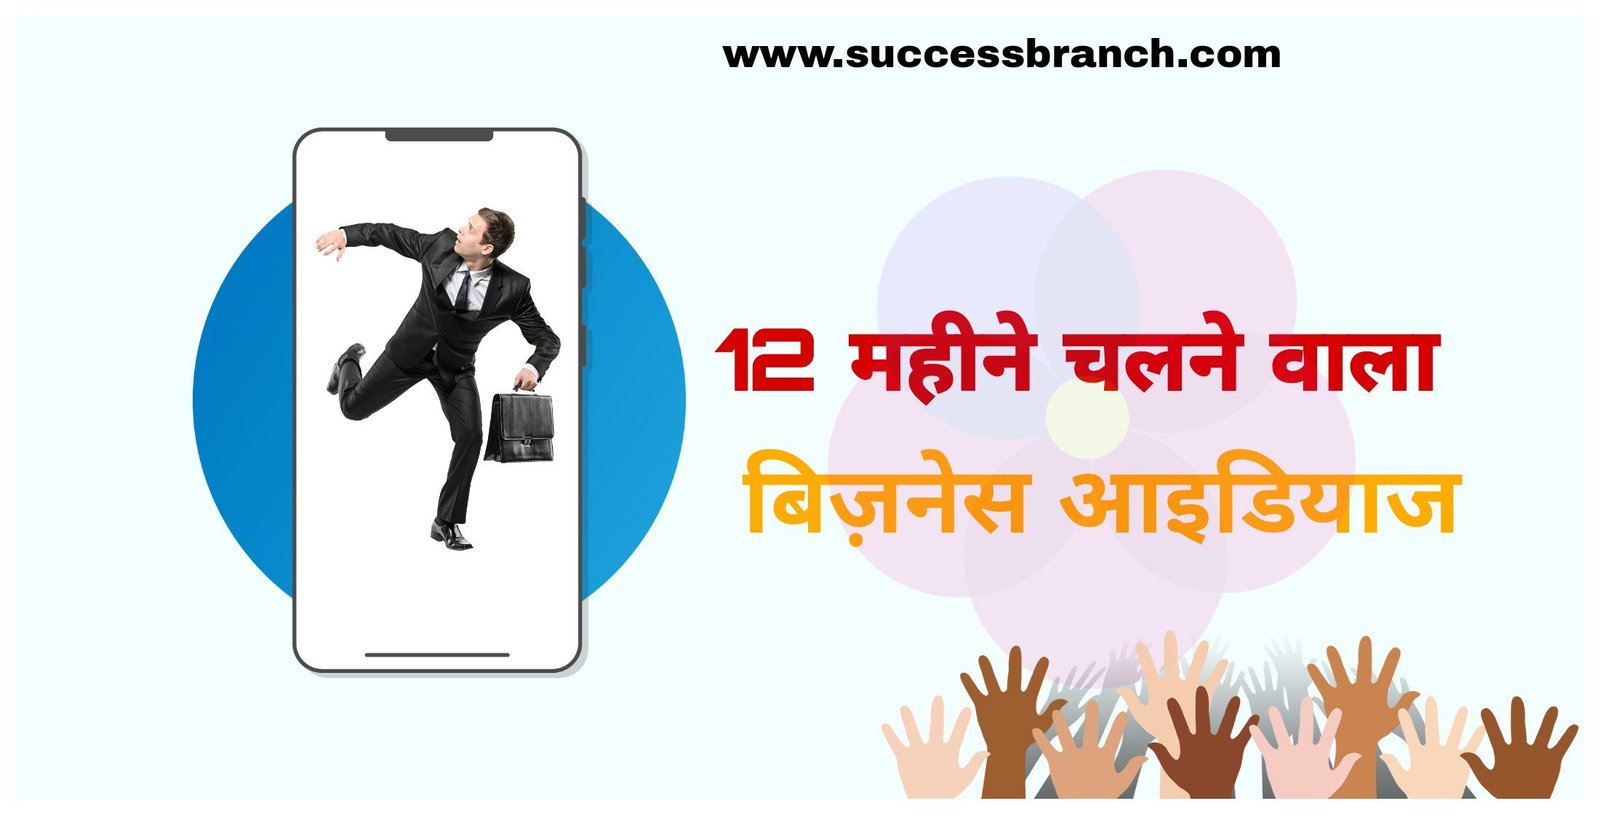 Business-ideas-in-hindi